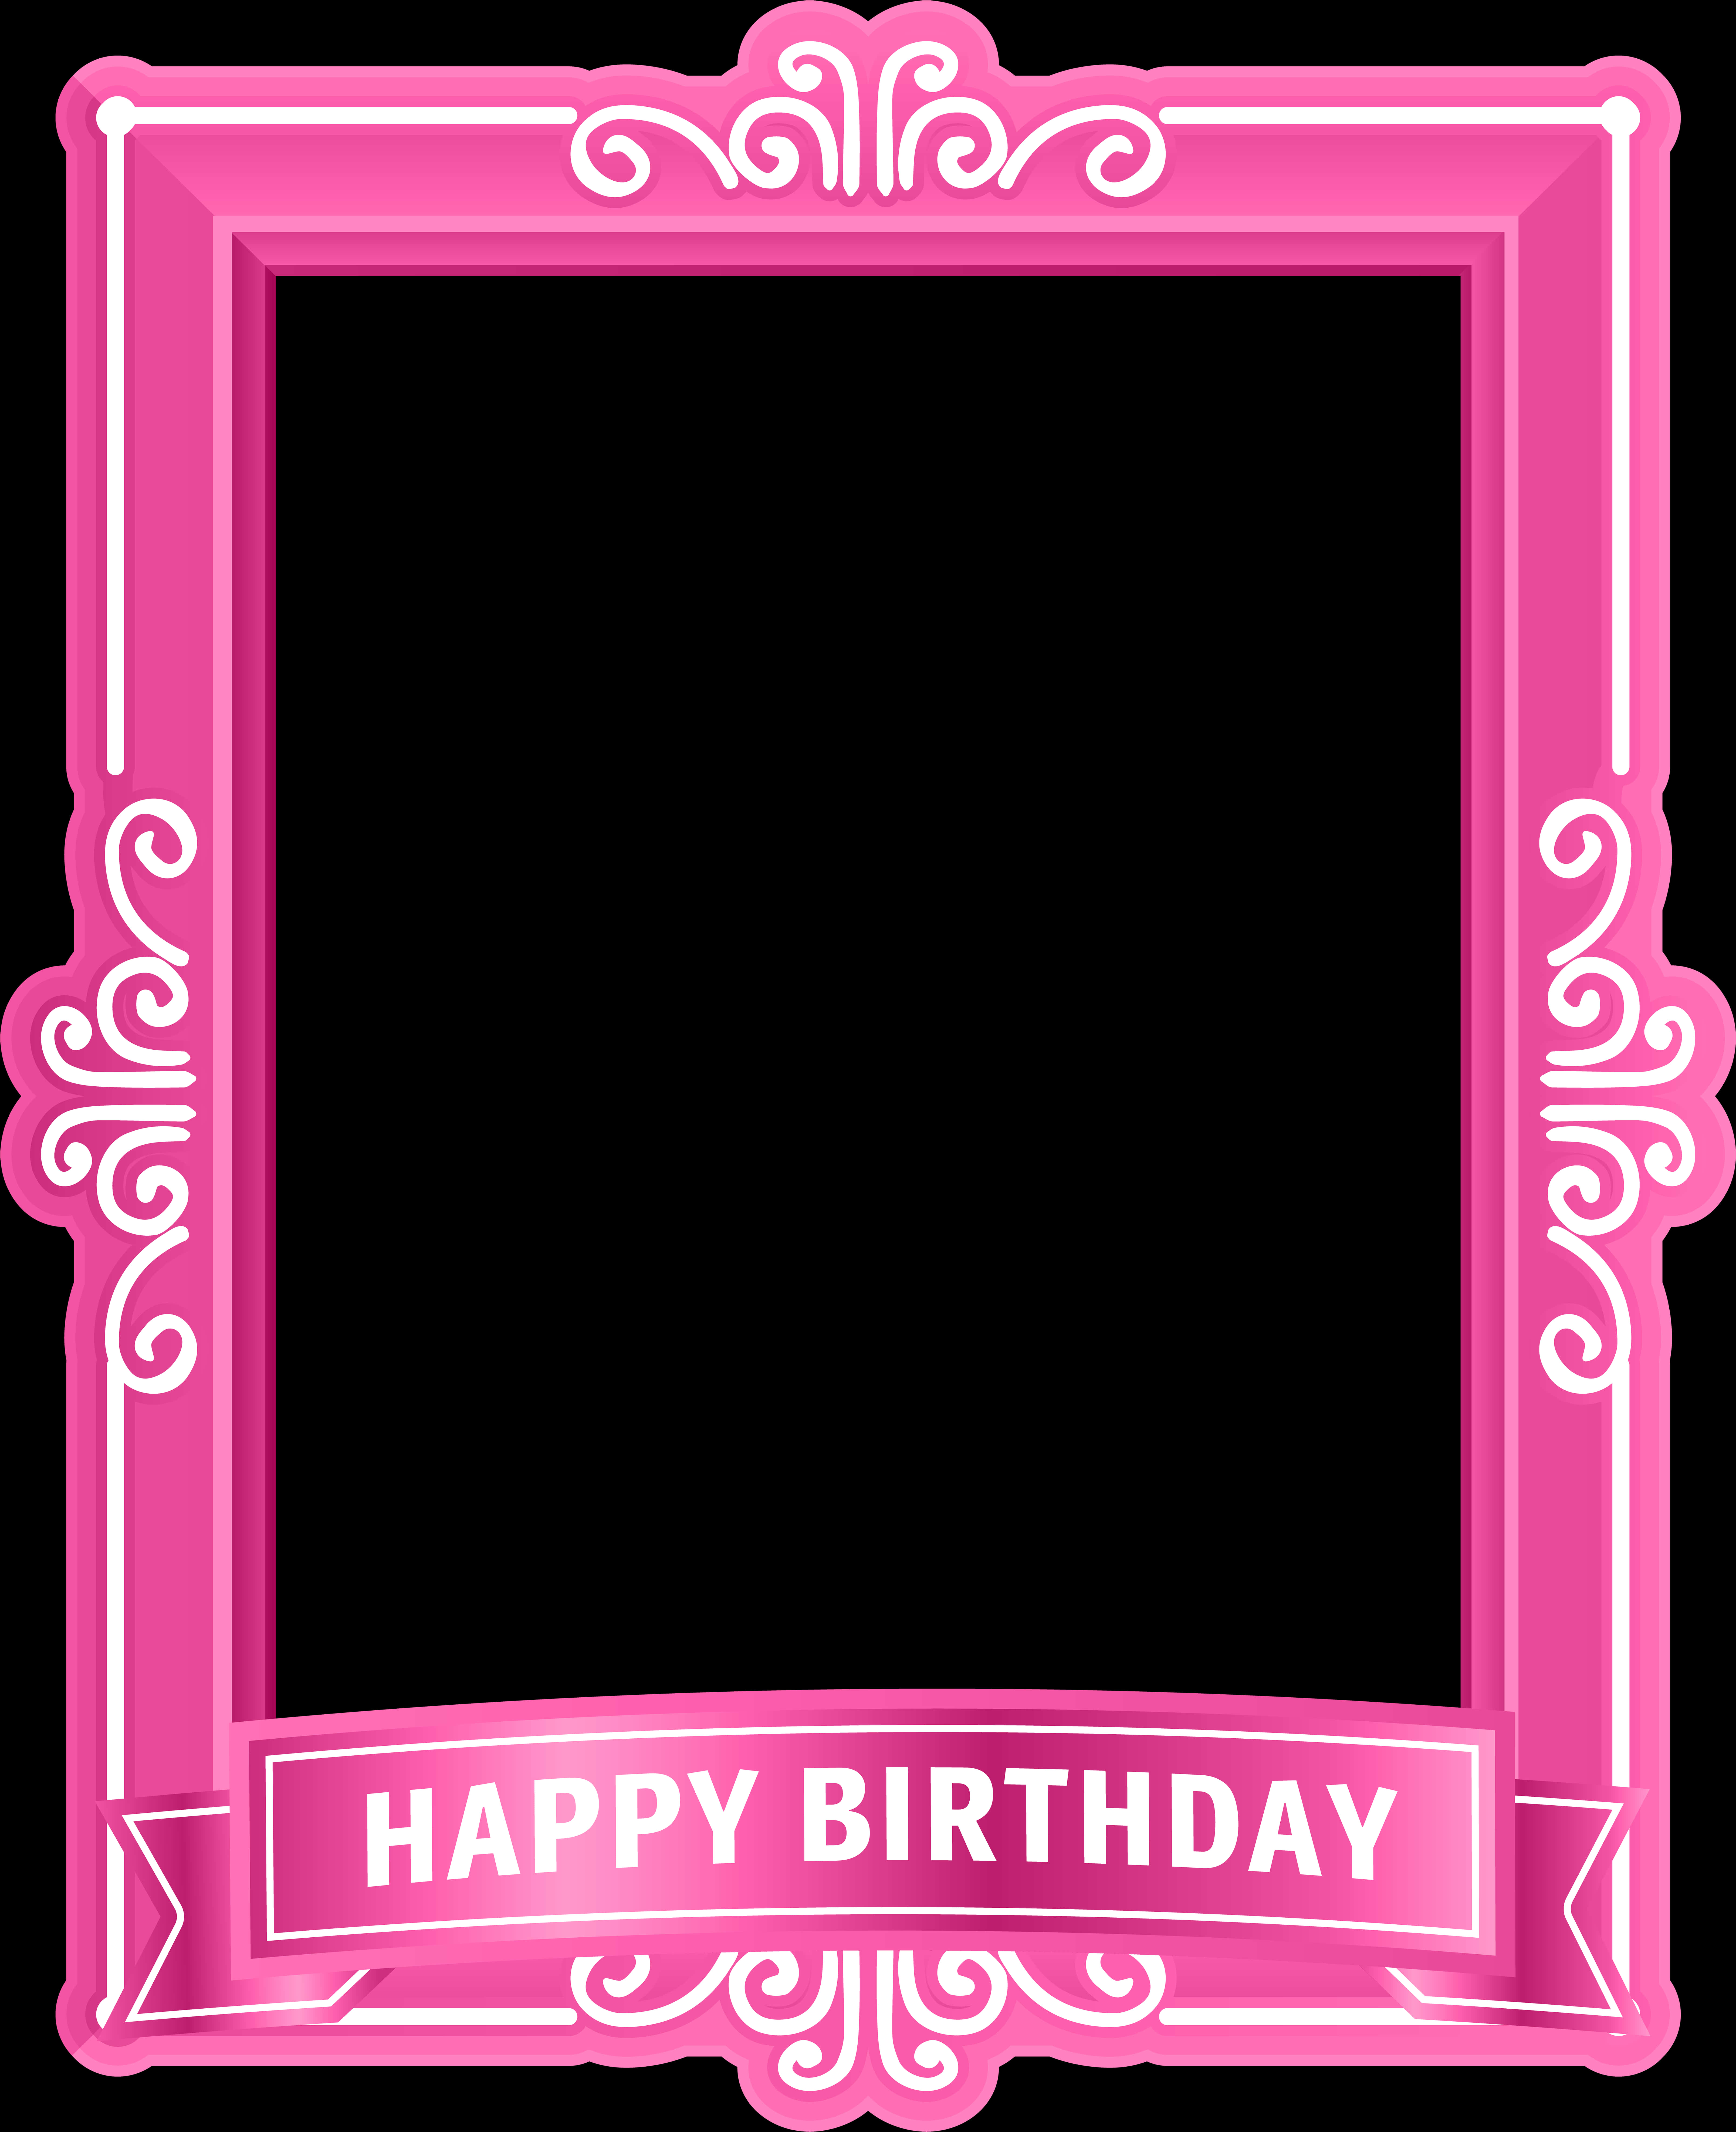 A Pink Frame With White Text